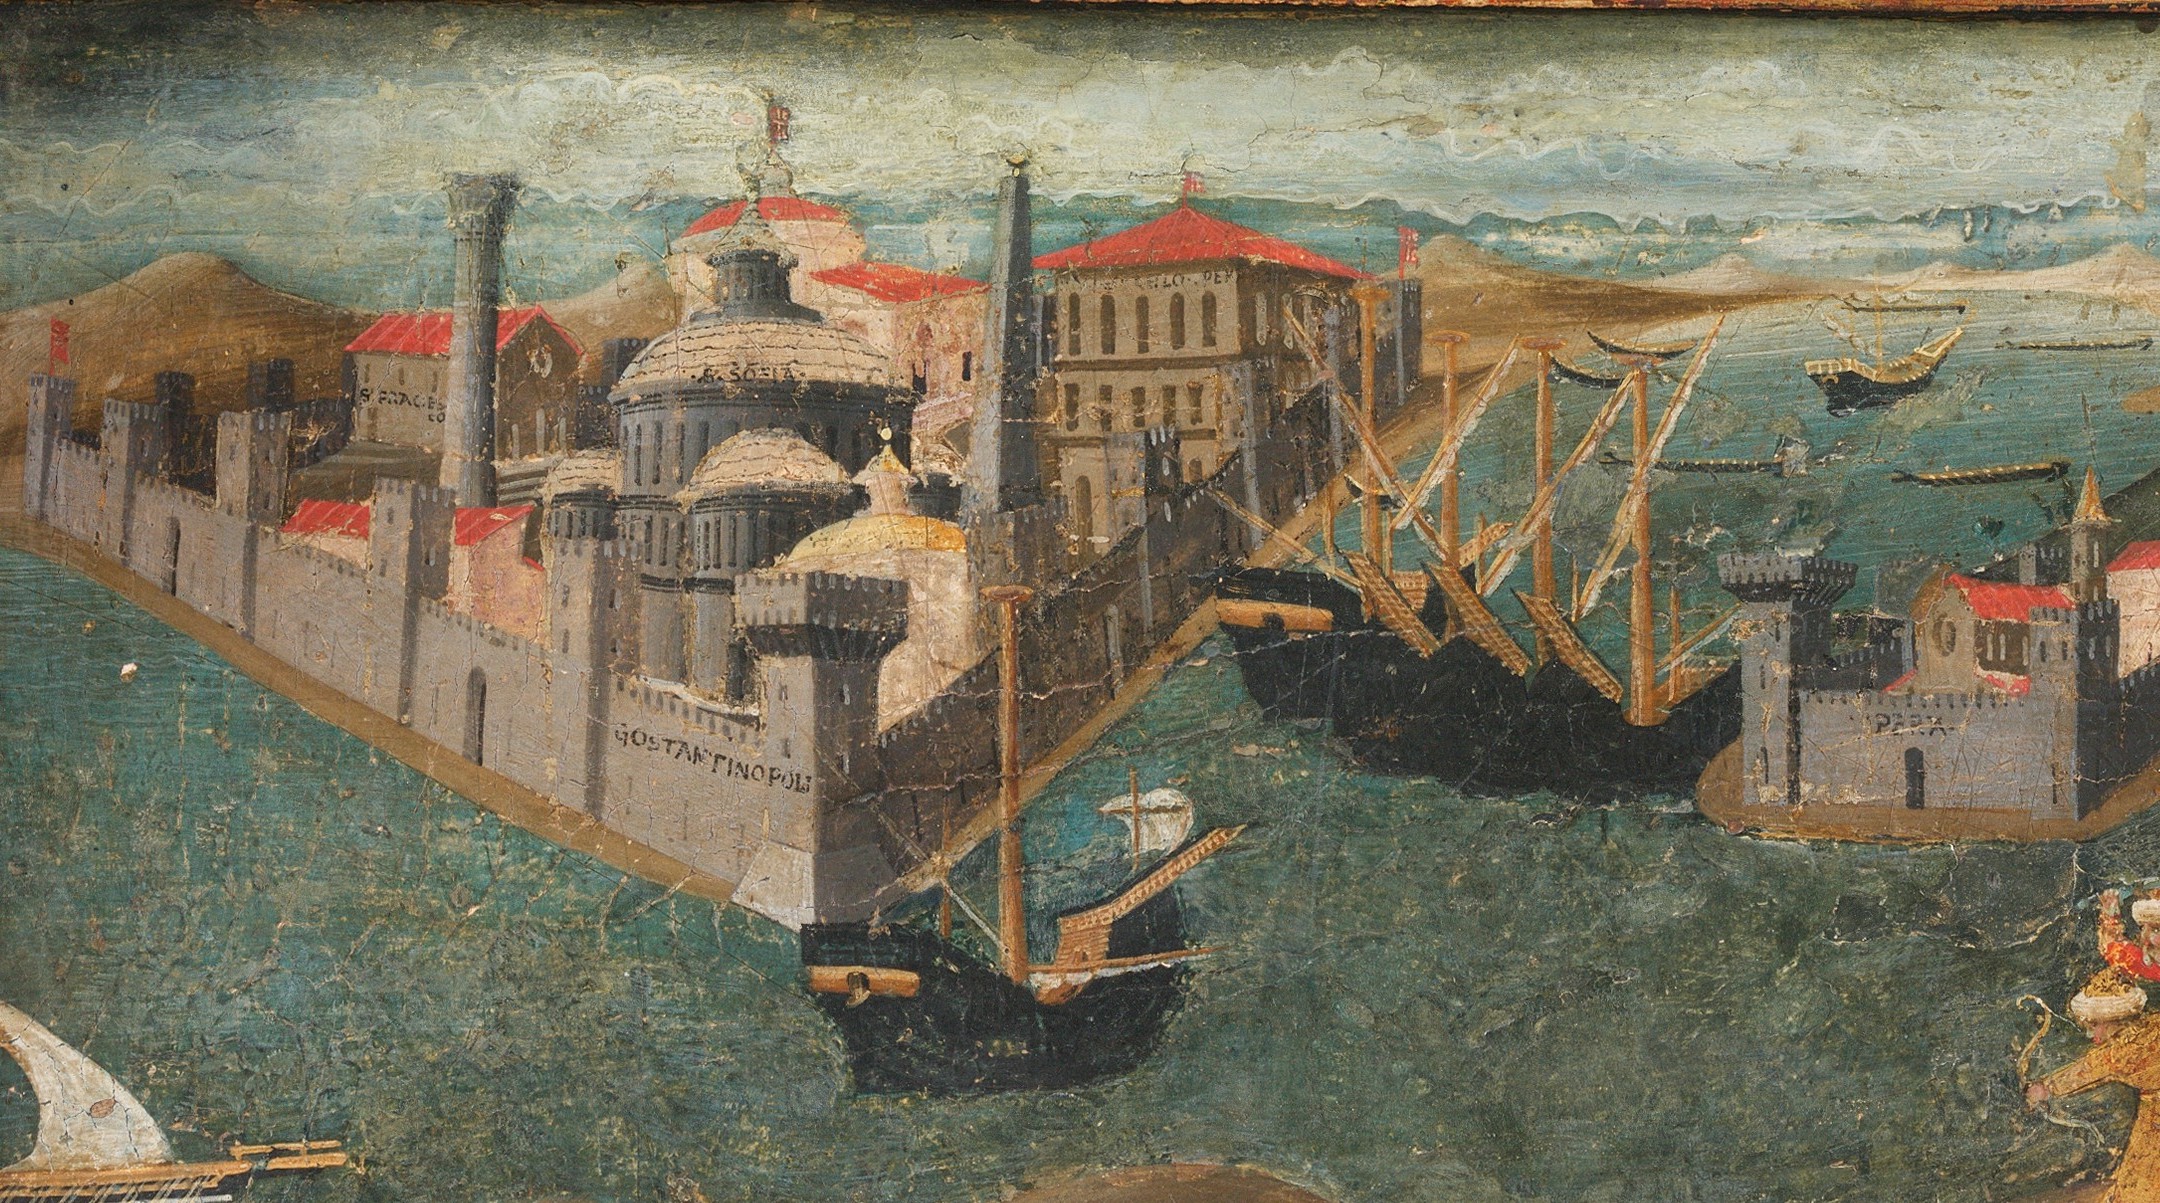 Constantinople (detail of front panel), Marco del Buono Giamberti and Apollonio di Giovanni di Tomaso, Cassone with the Conquest of Trebizond, after c. 1461, poplar wood, linen, polychromed and gilded gesso with panel painted in tempera and gold, 100.3 x 195.6 x 83.5 cm (The Metropolitan Museum of Art)